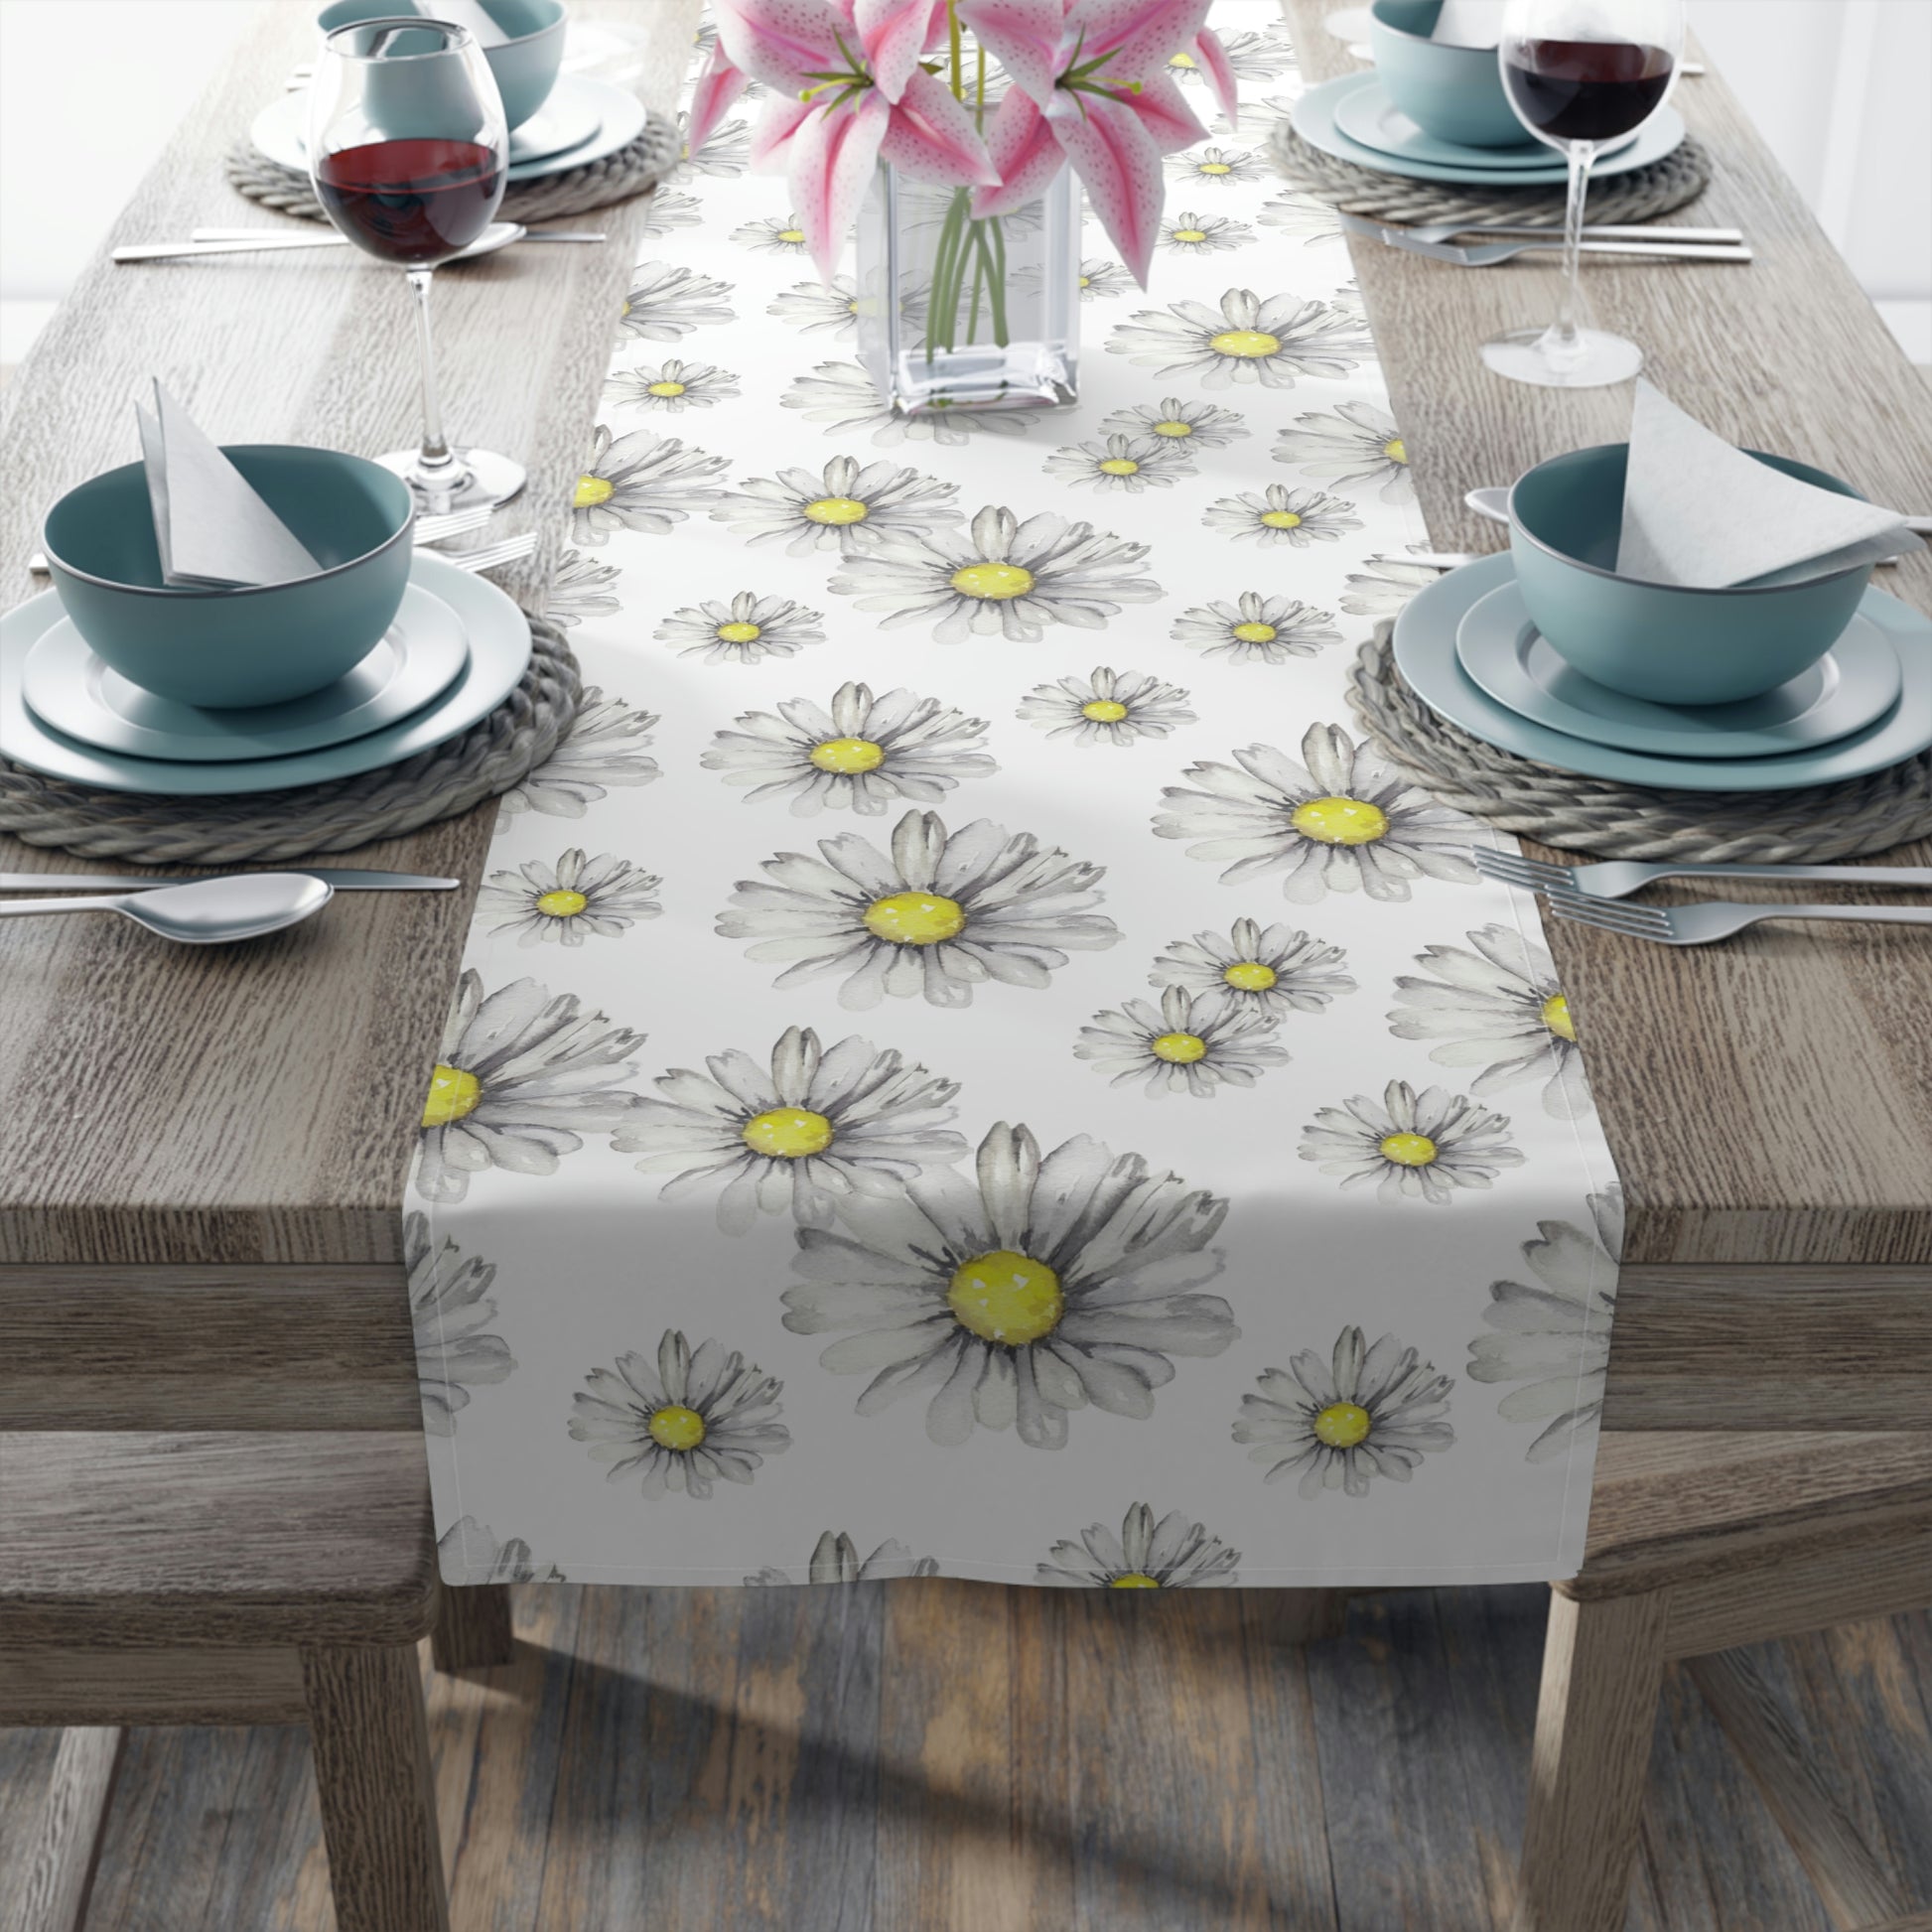 Summer table runner with white daisy and yellow